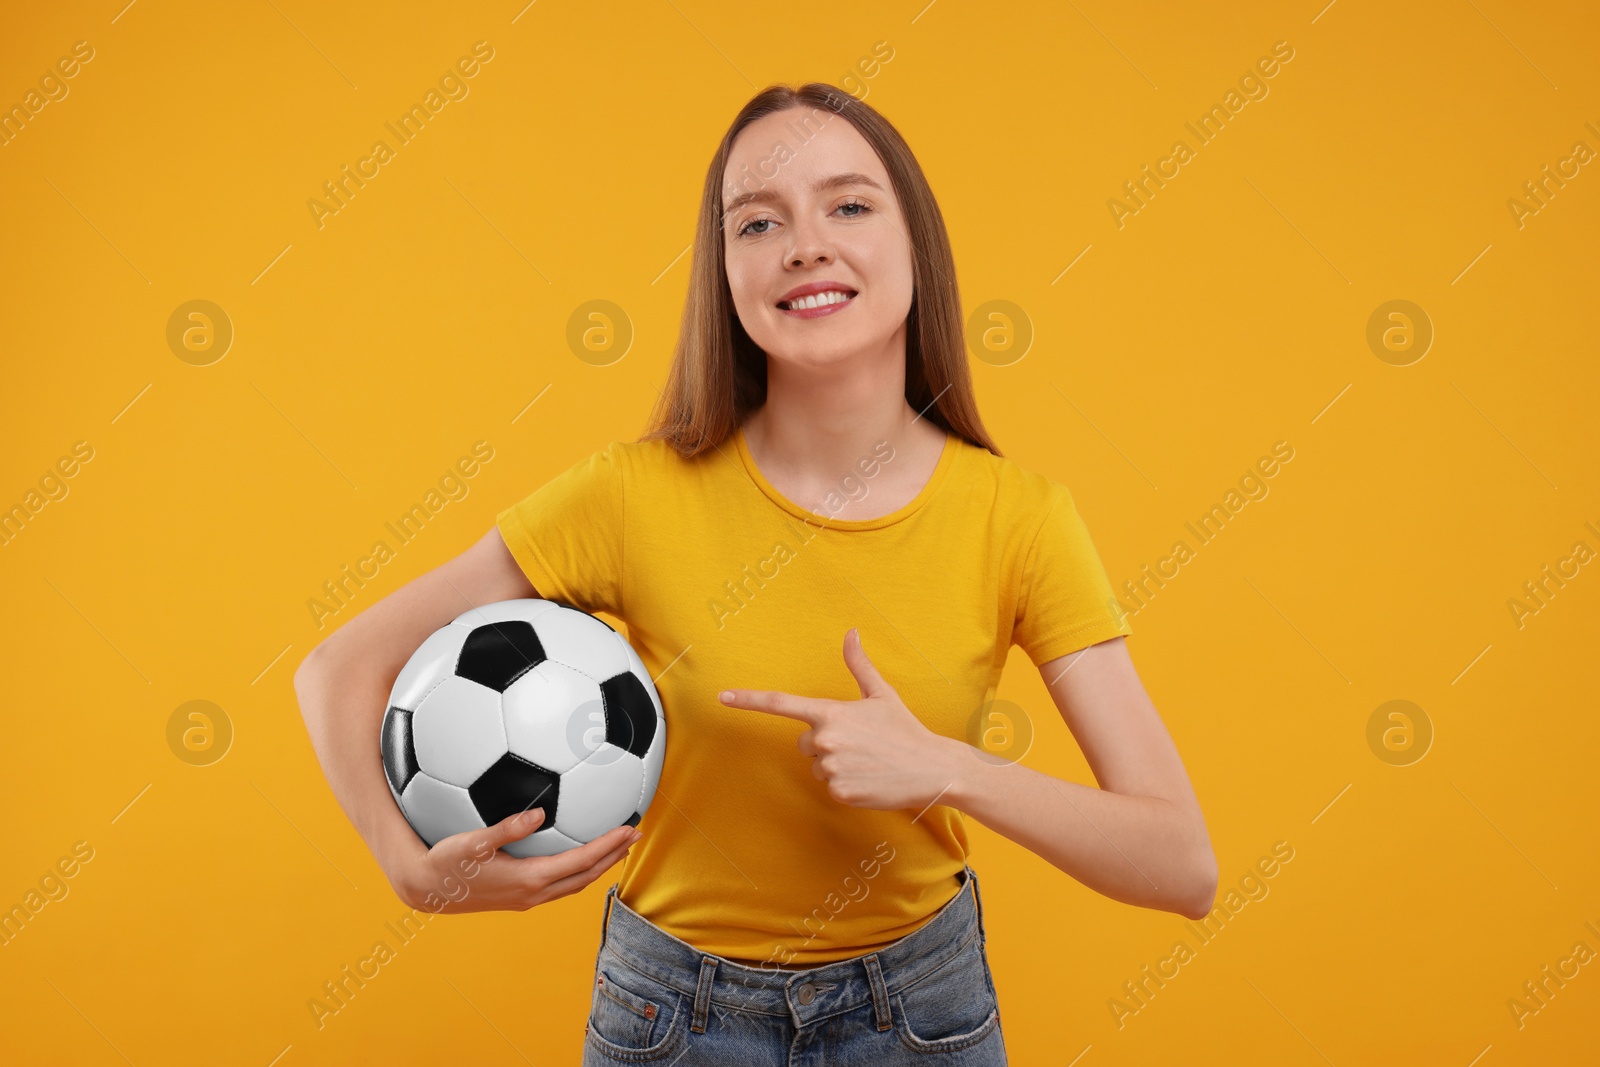 Photo of Happy sports fan with ball on yellow background